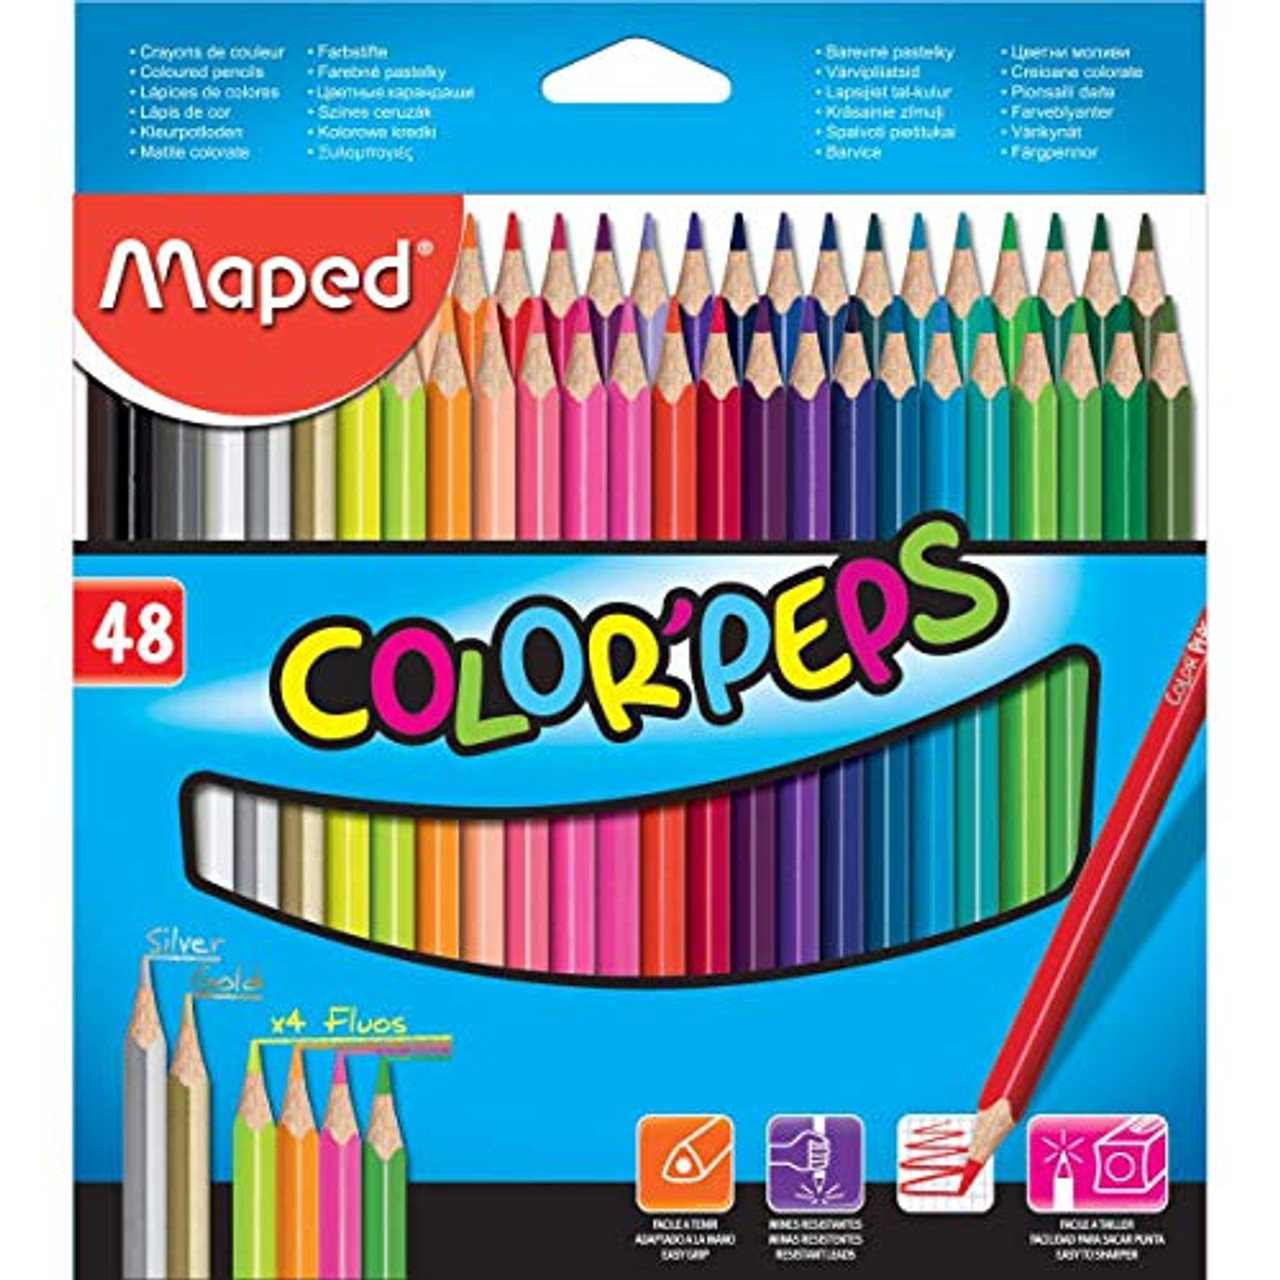 Maped Color'Peps 2-Hole Colored Pencil Sharpener, Assorted Colors